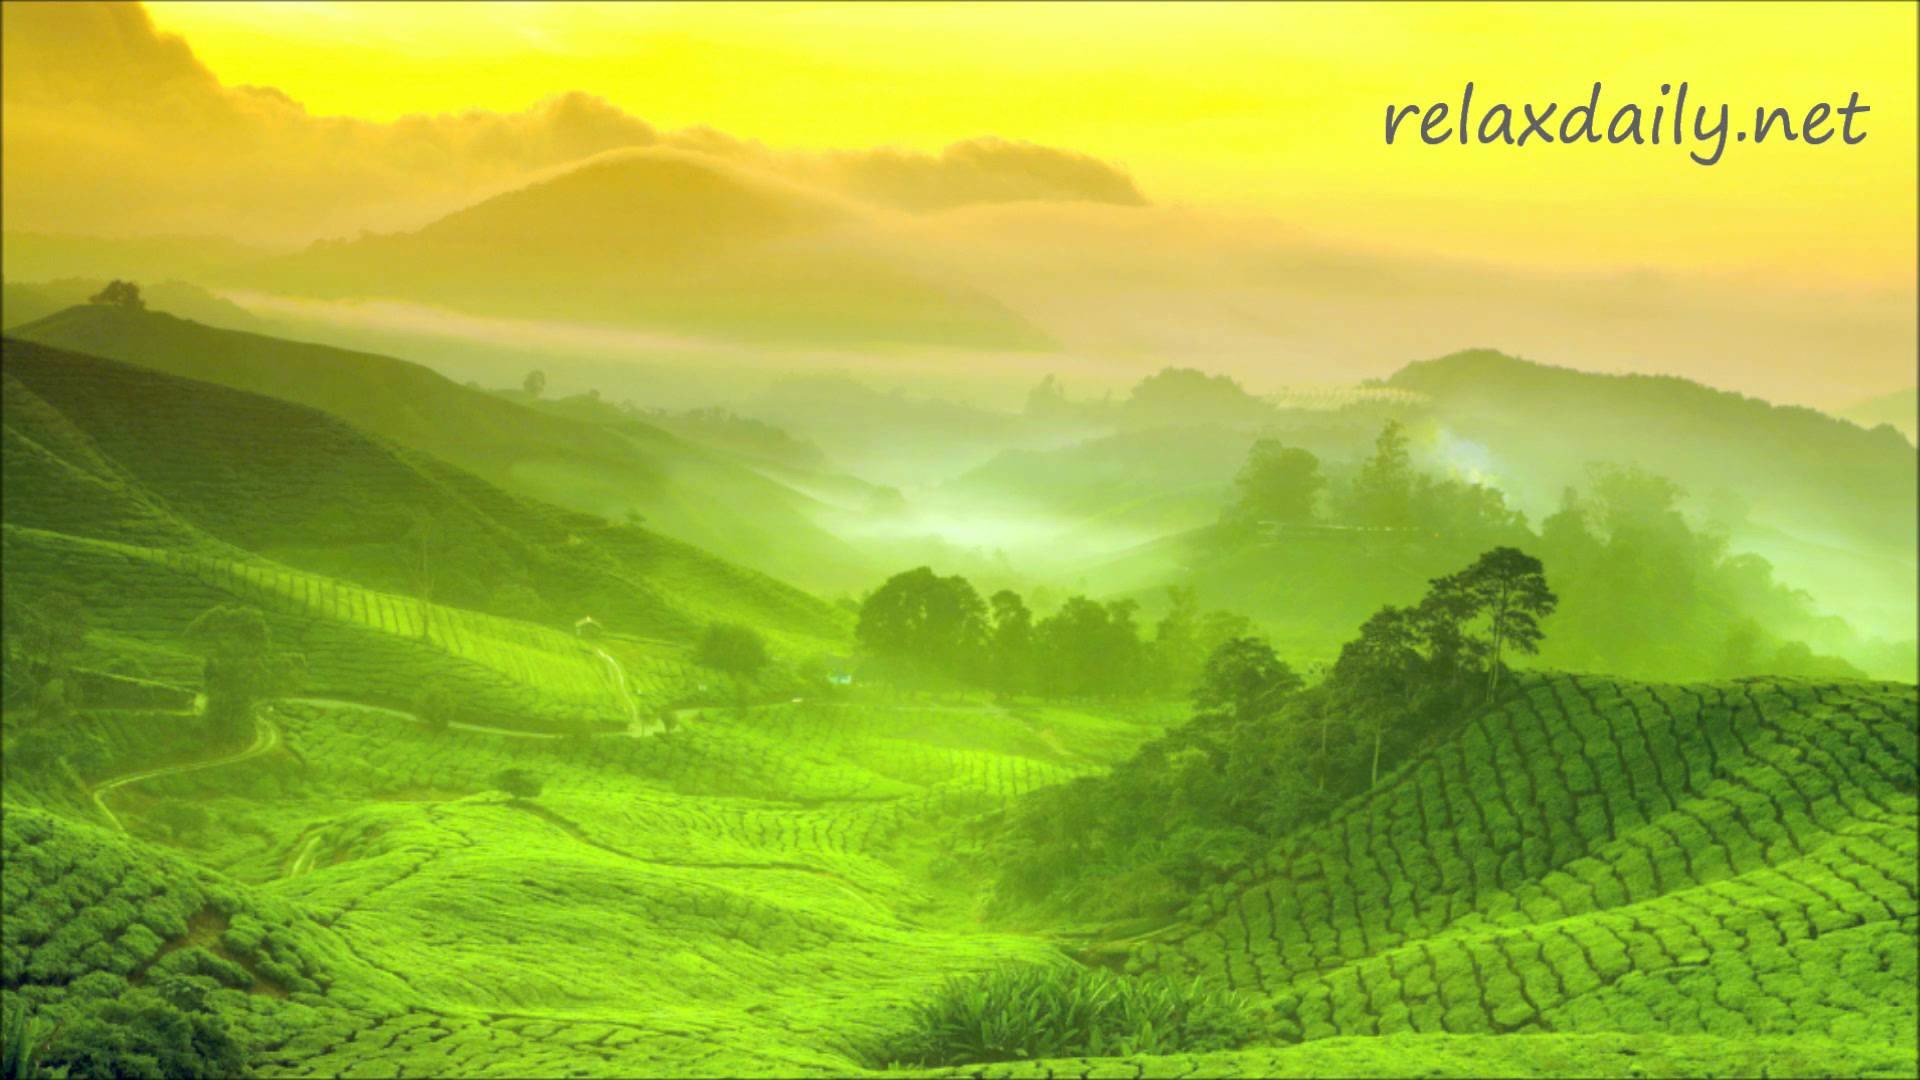 1920x1080 Background Music Instrumental - calm, relaxing, soothing - relaxdaily NÂ°046  - YouTube